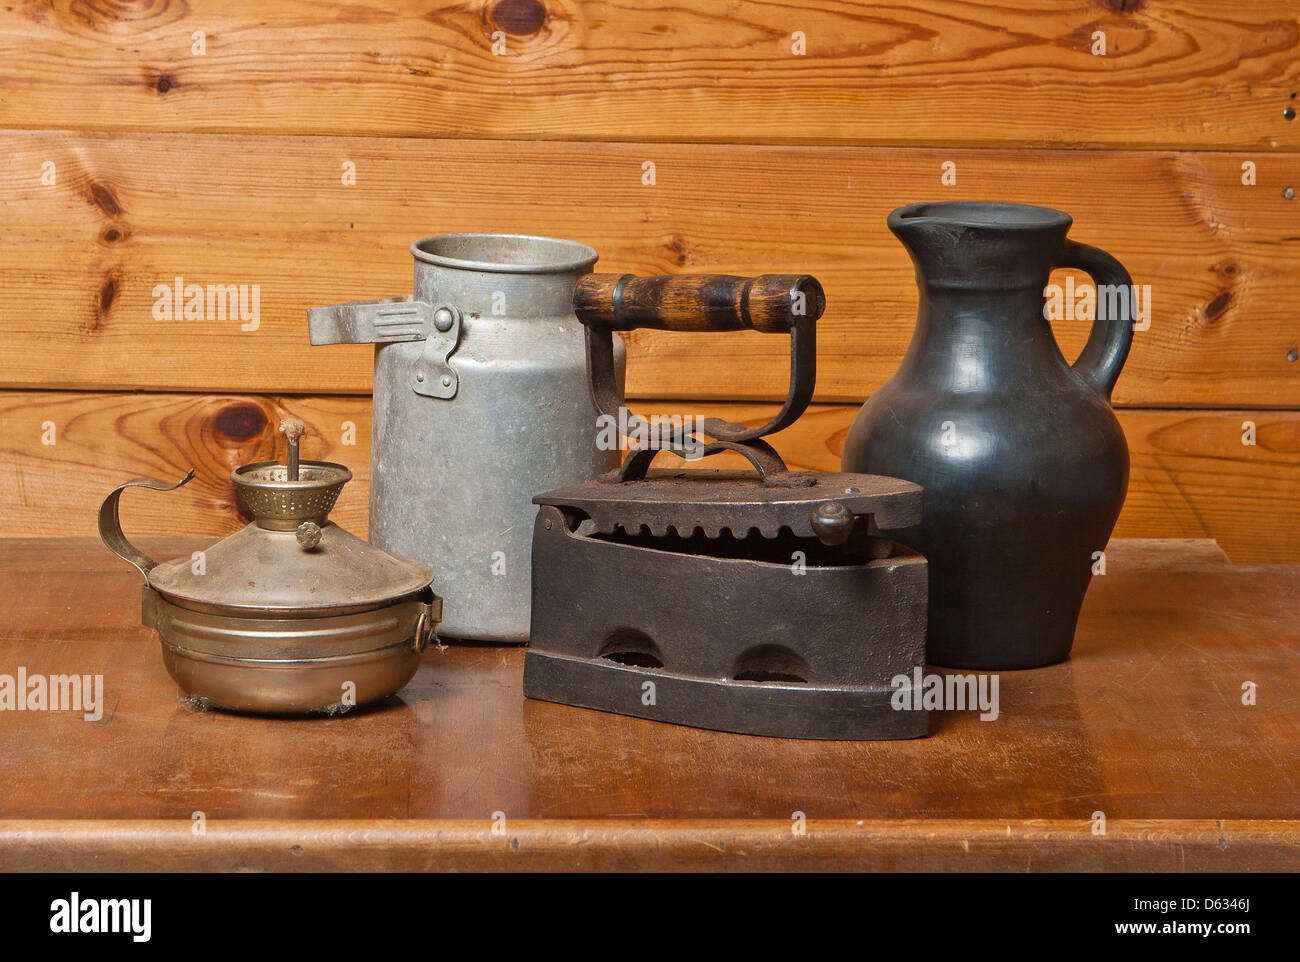 https://c8.alamy.com/comp/D6346J/still-life-with-old-things-on-brown-wooden-background-D6346J.jpg